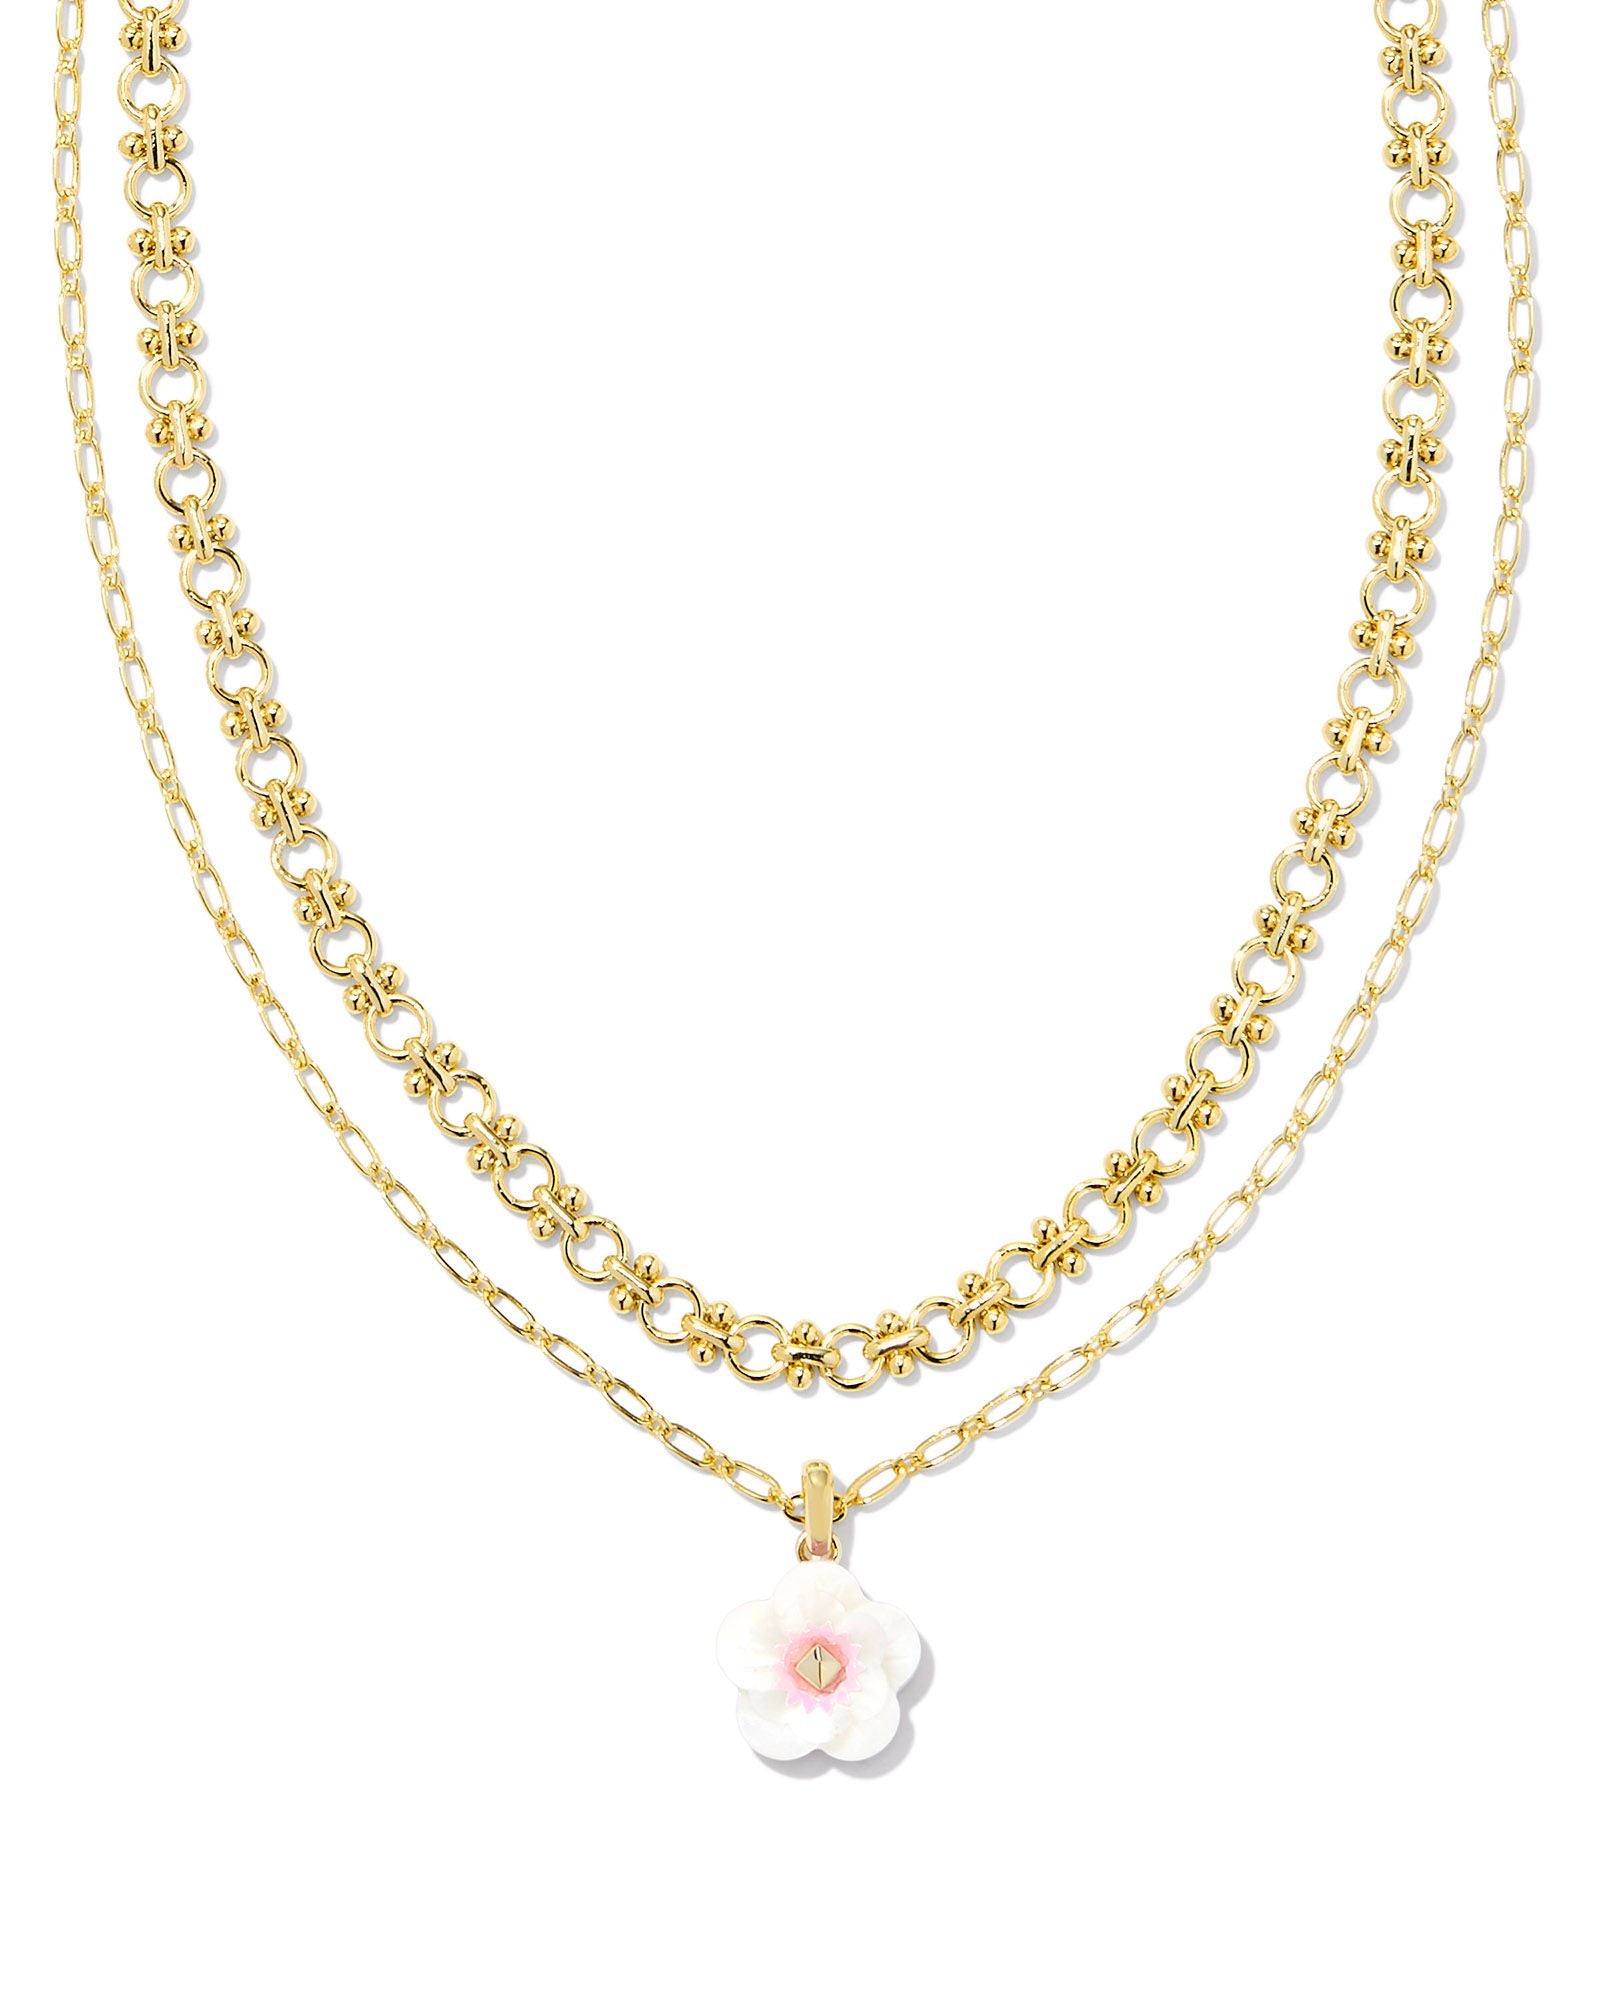 Deliah Multi Strand Necklace in Gold Iridescent Pink/White Mix